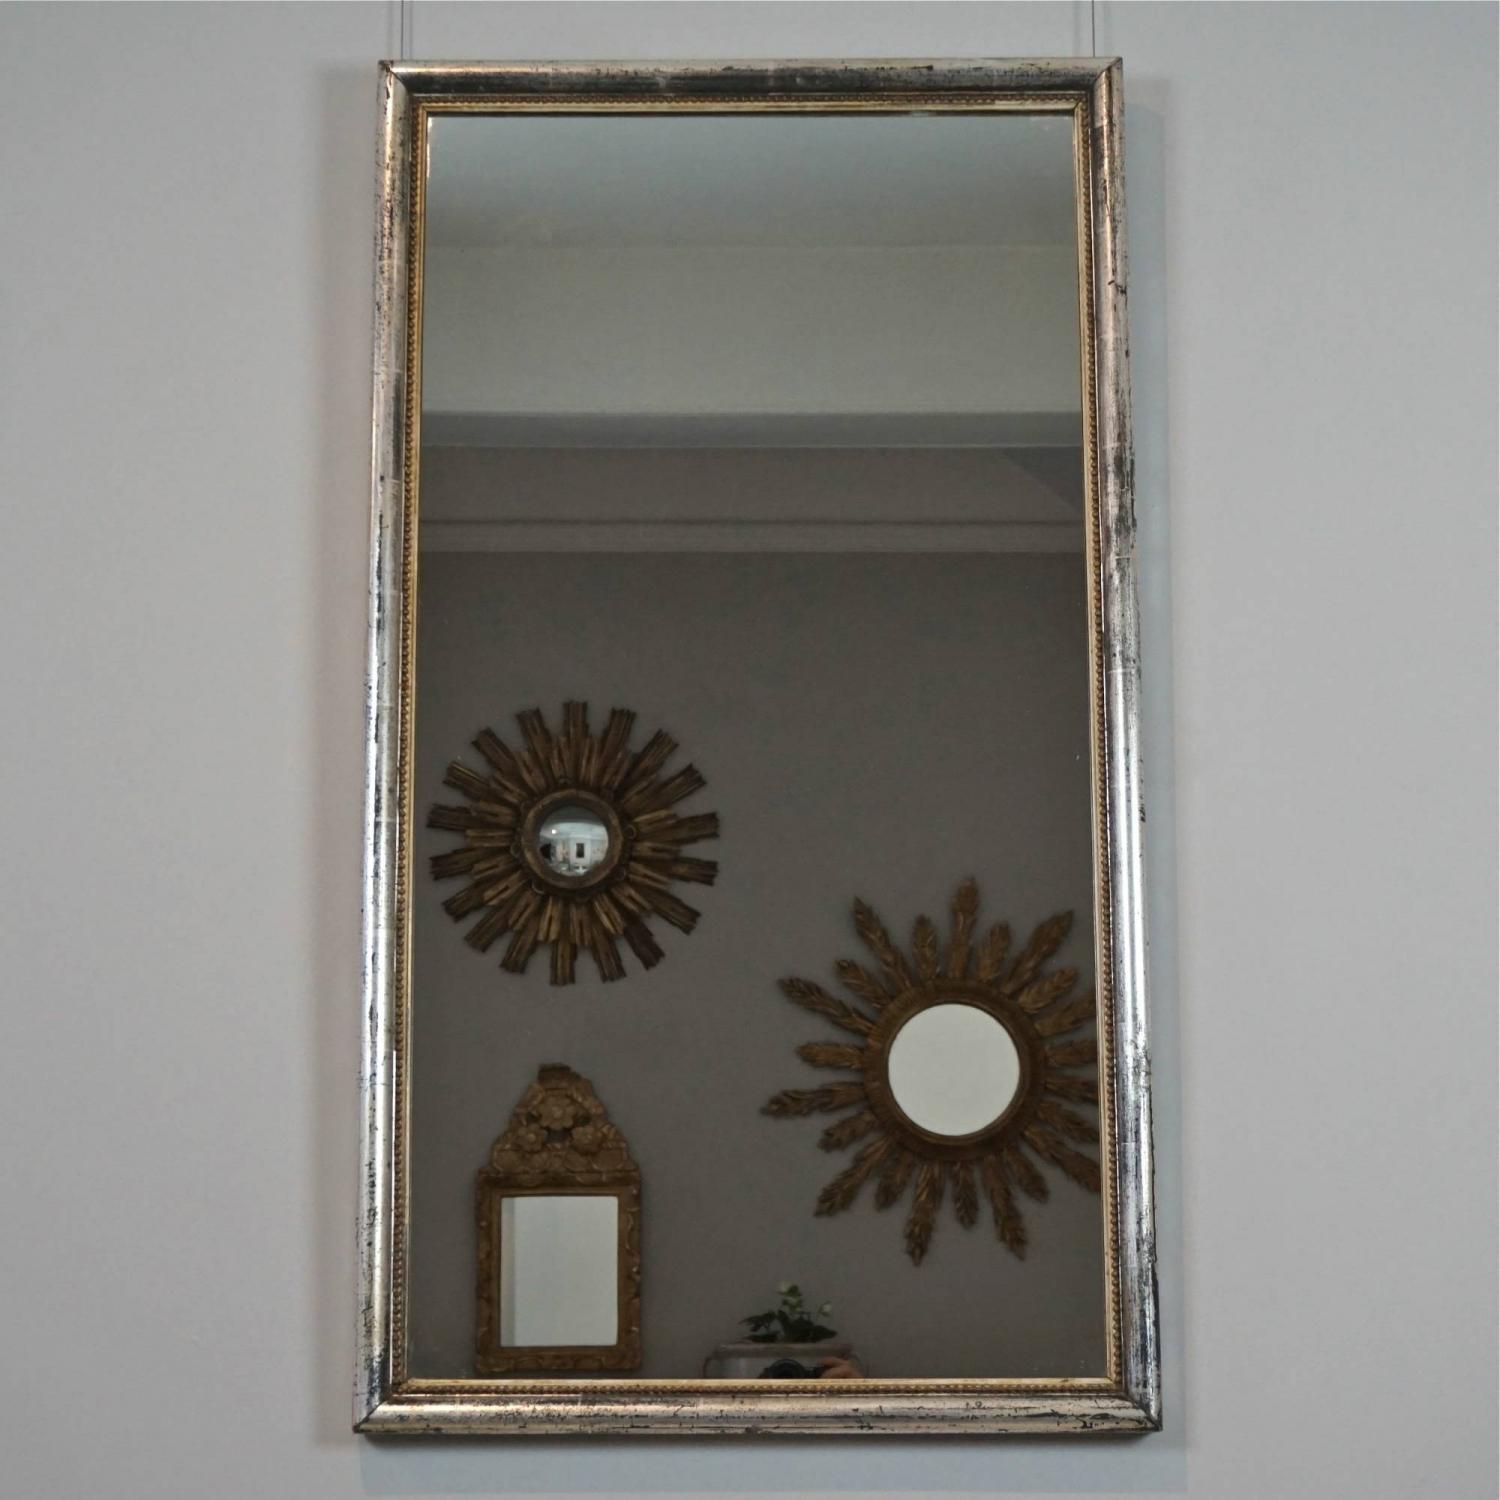 VERY FINE SILVER BISTRO MIRROR WITH RARE BEADED FRAME